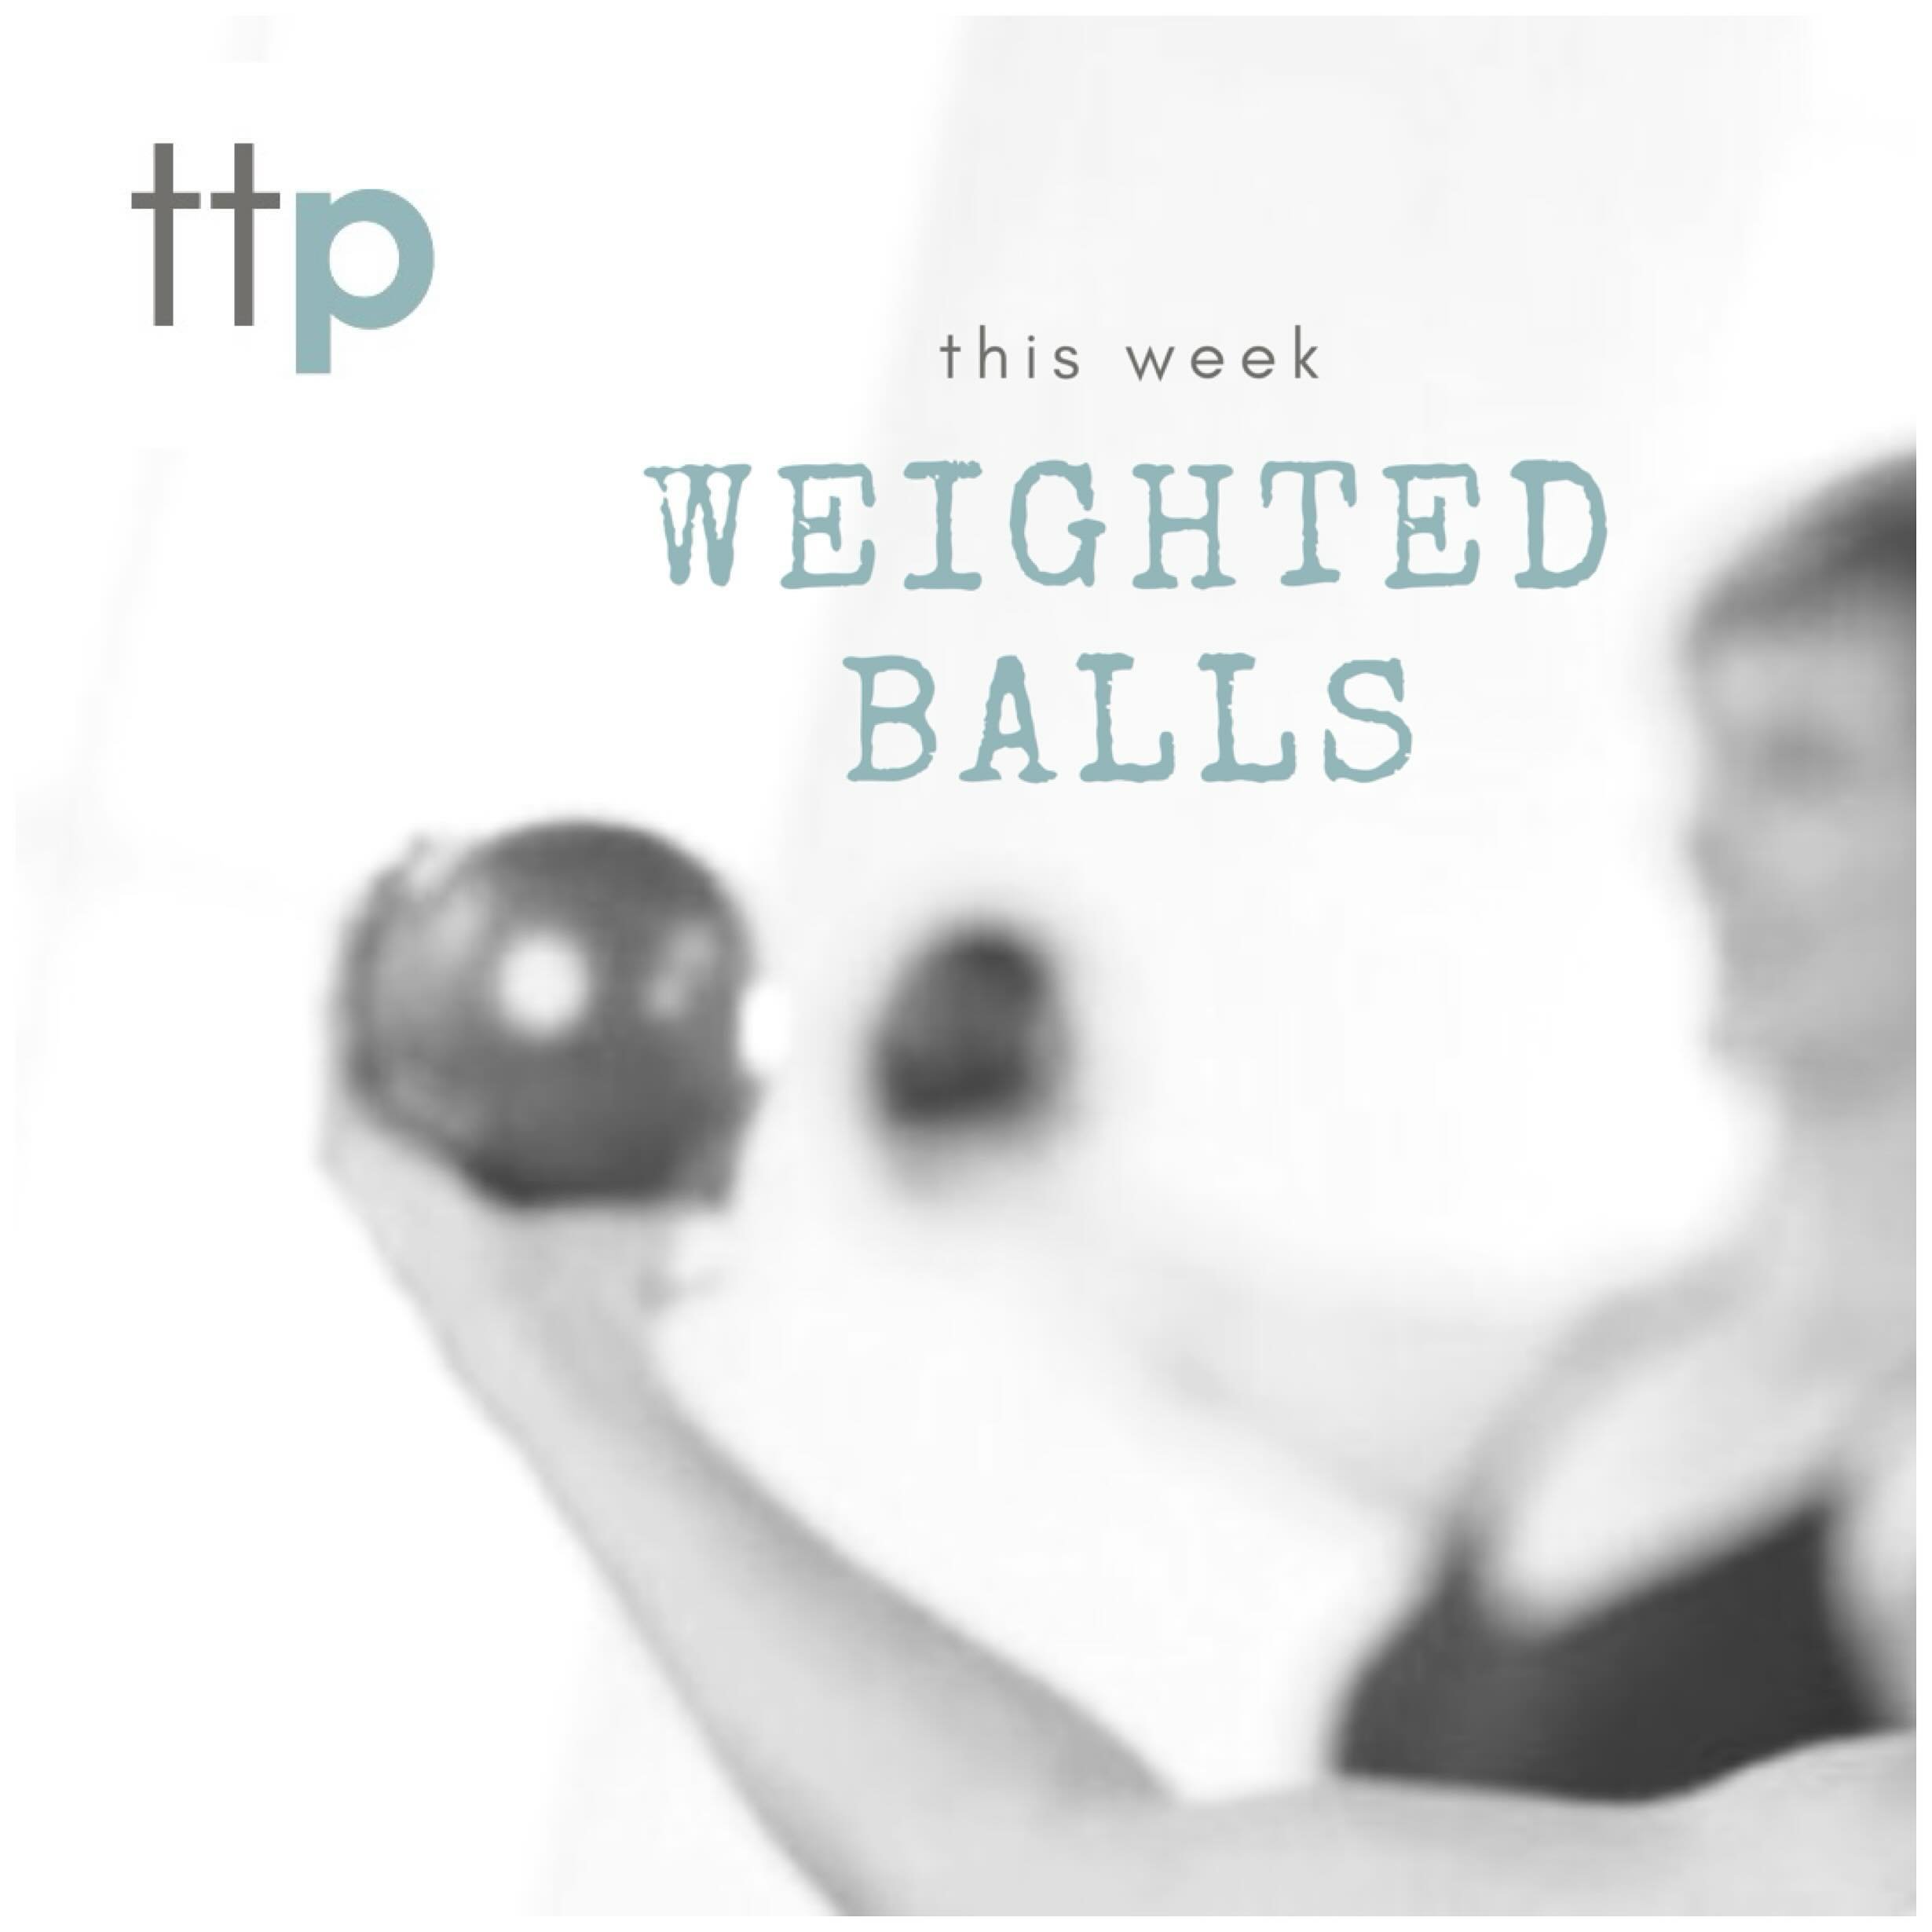 Each week in our face-to-face group matwork classes, we add a different piece of small equipment.

We&rsquo;re using the weighted balls this week to create tone, and find connection into our functional slings
.
.
.
#weightedballs #pilates #pilatescla